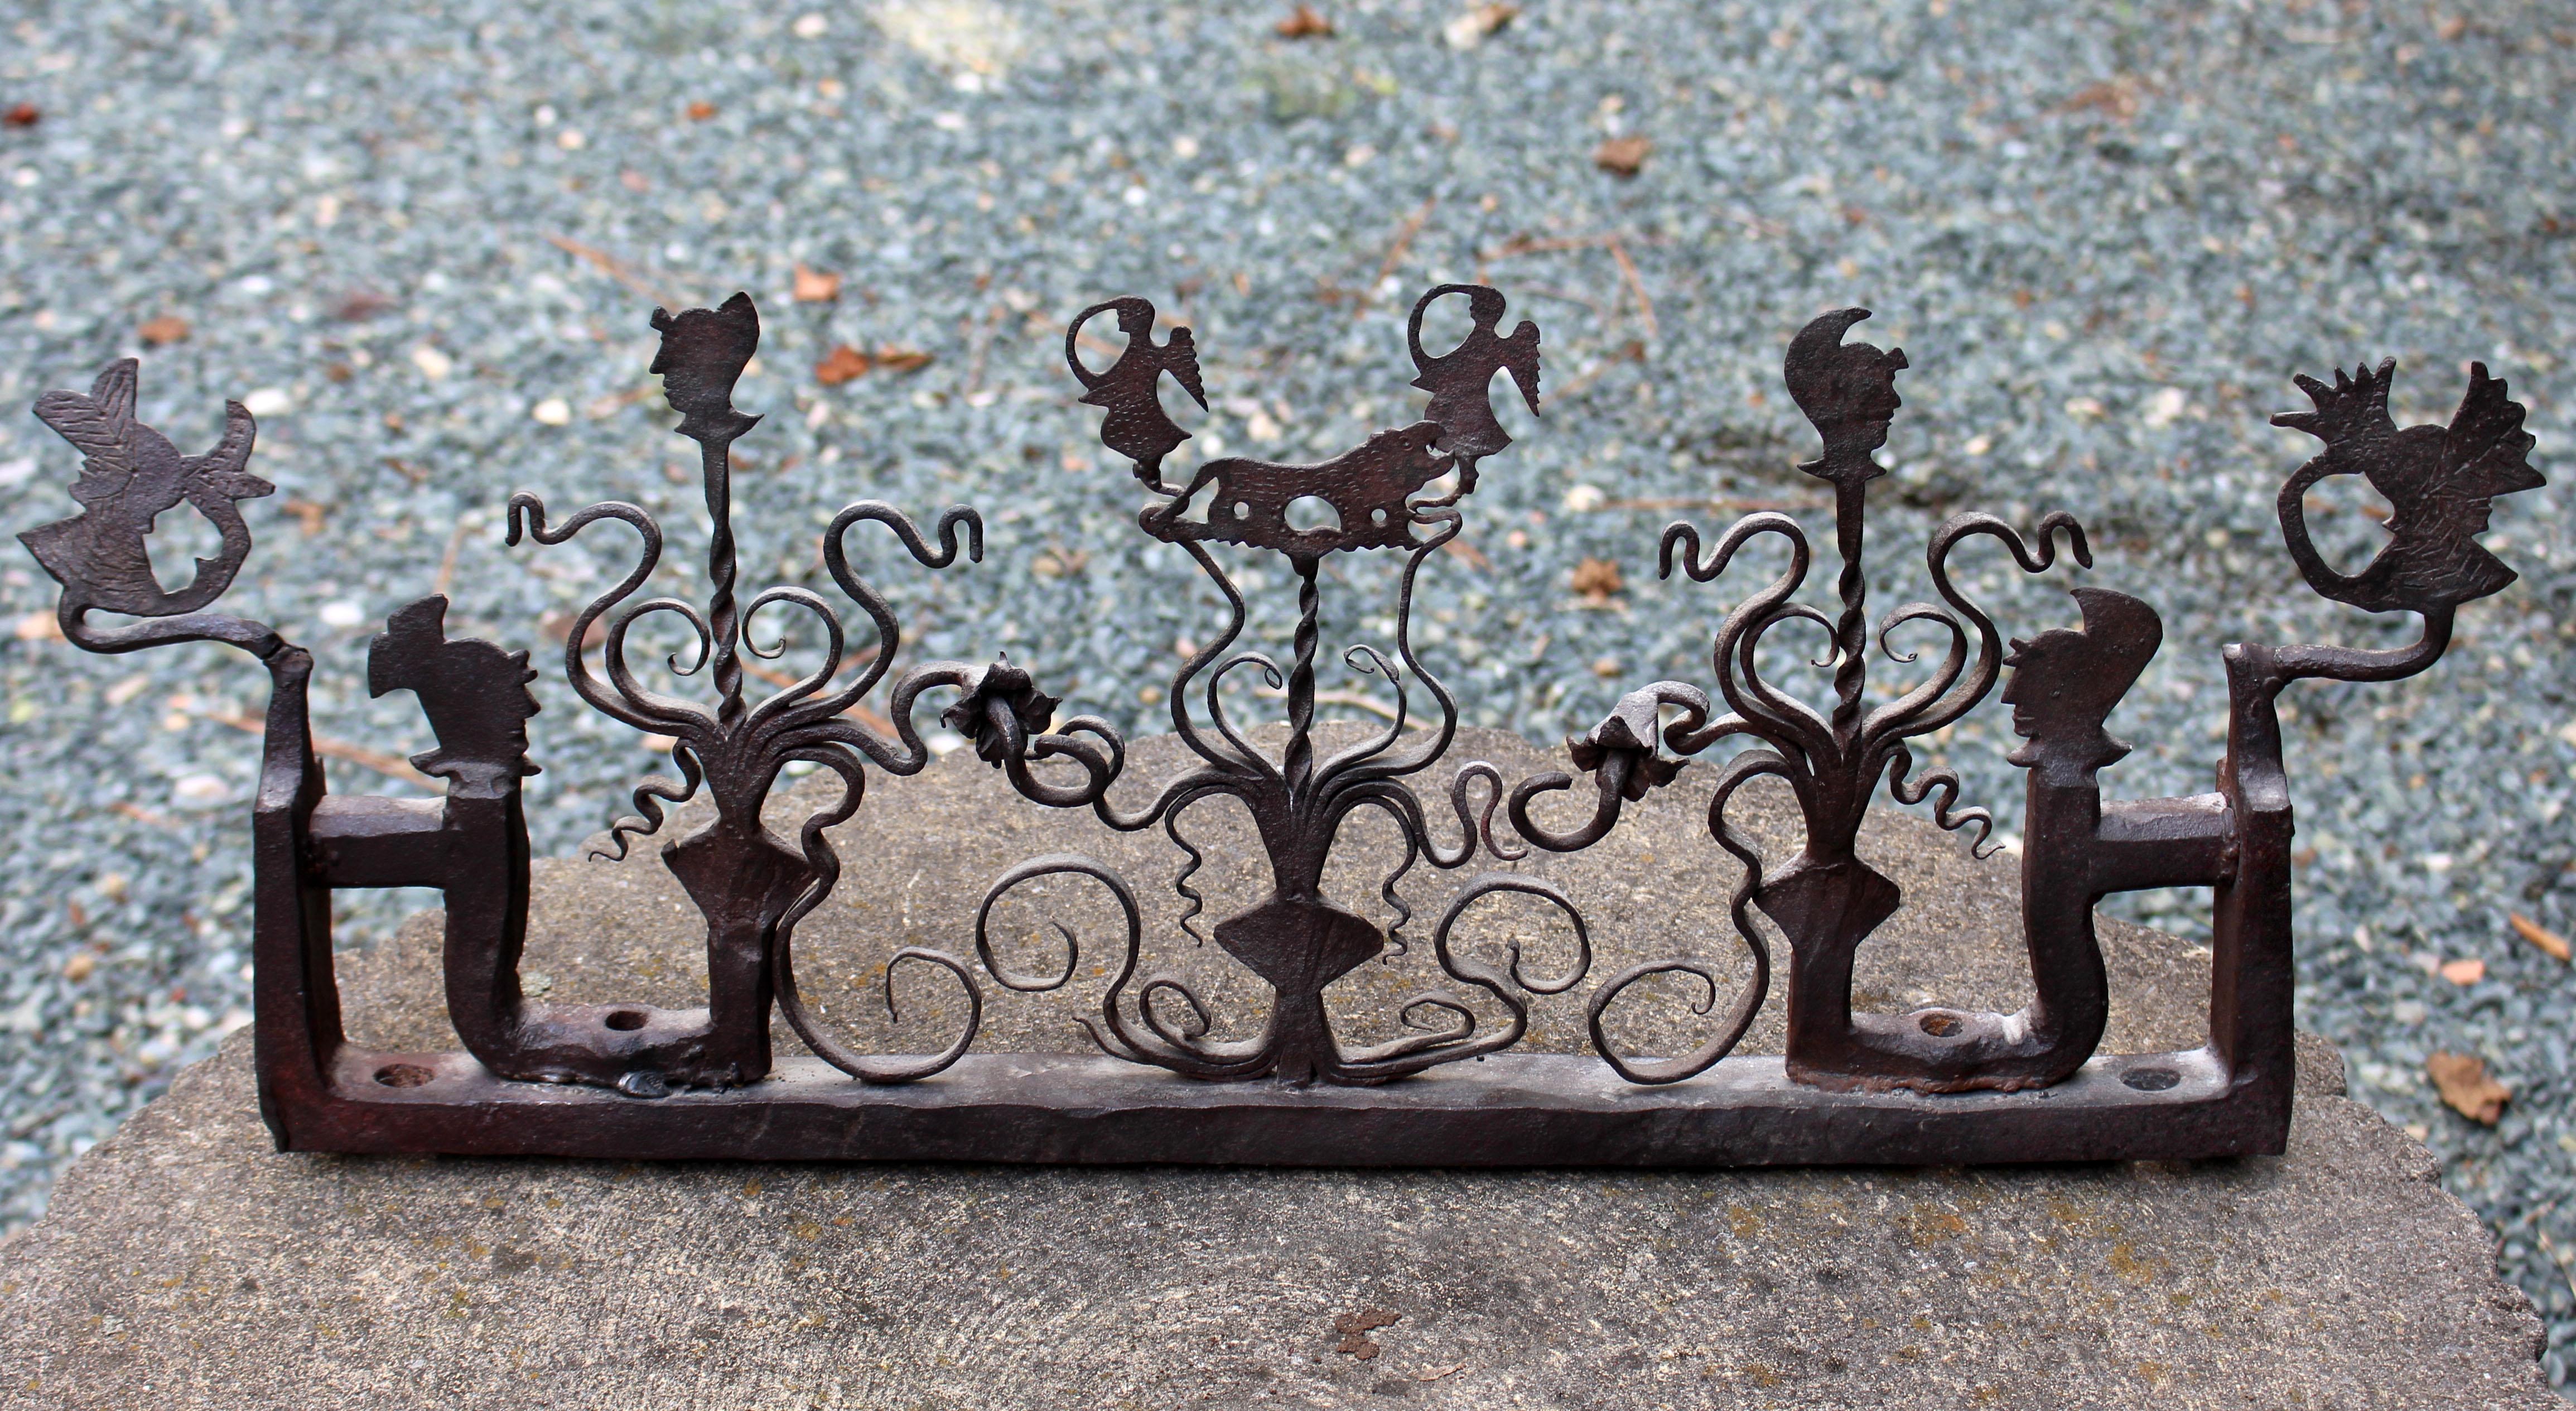 19th century wrought iron fence fragment, Continental likely Portuguese. Fancifully decorated with scrolls, helmeted busts, a pair of angels flanking a lion, etc. Fun in front of a fireplace, kitchen backsplash or accent decoration. Estate of Jean